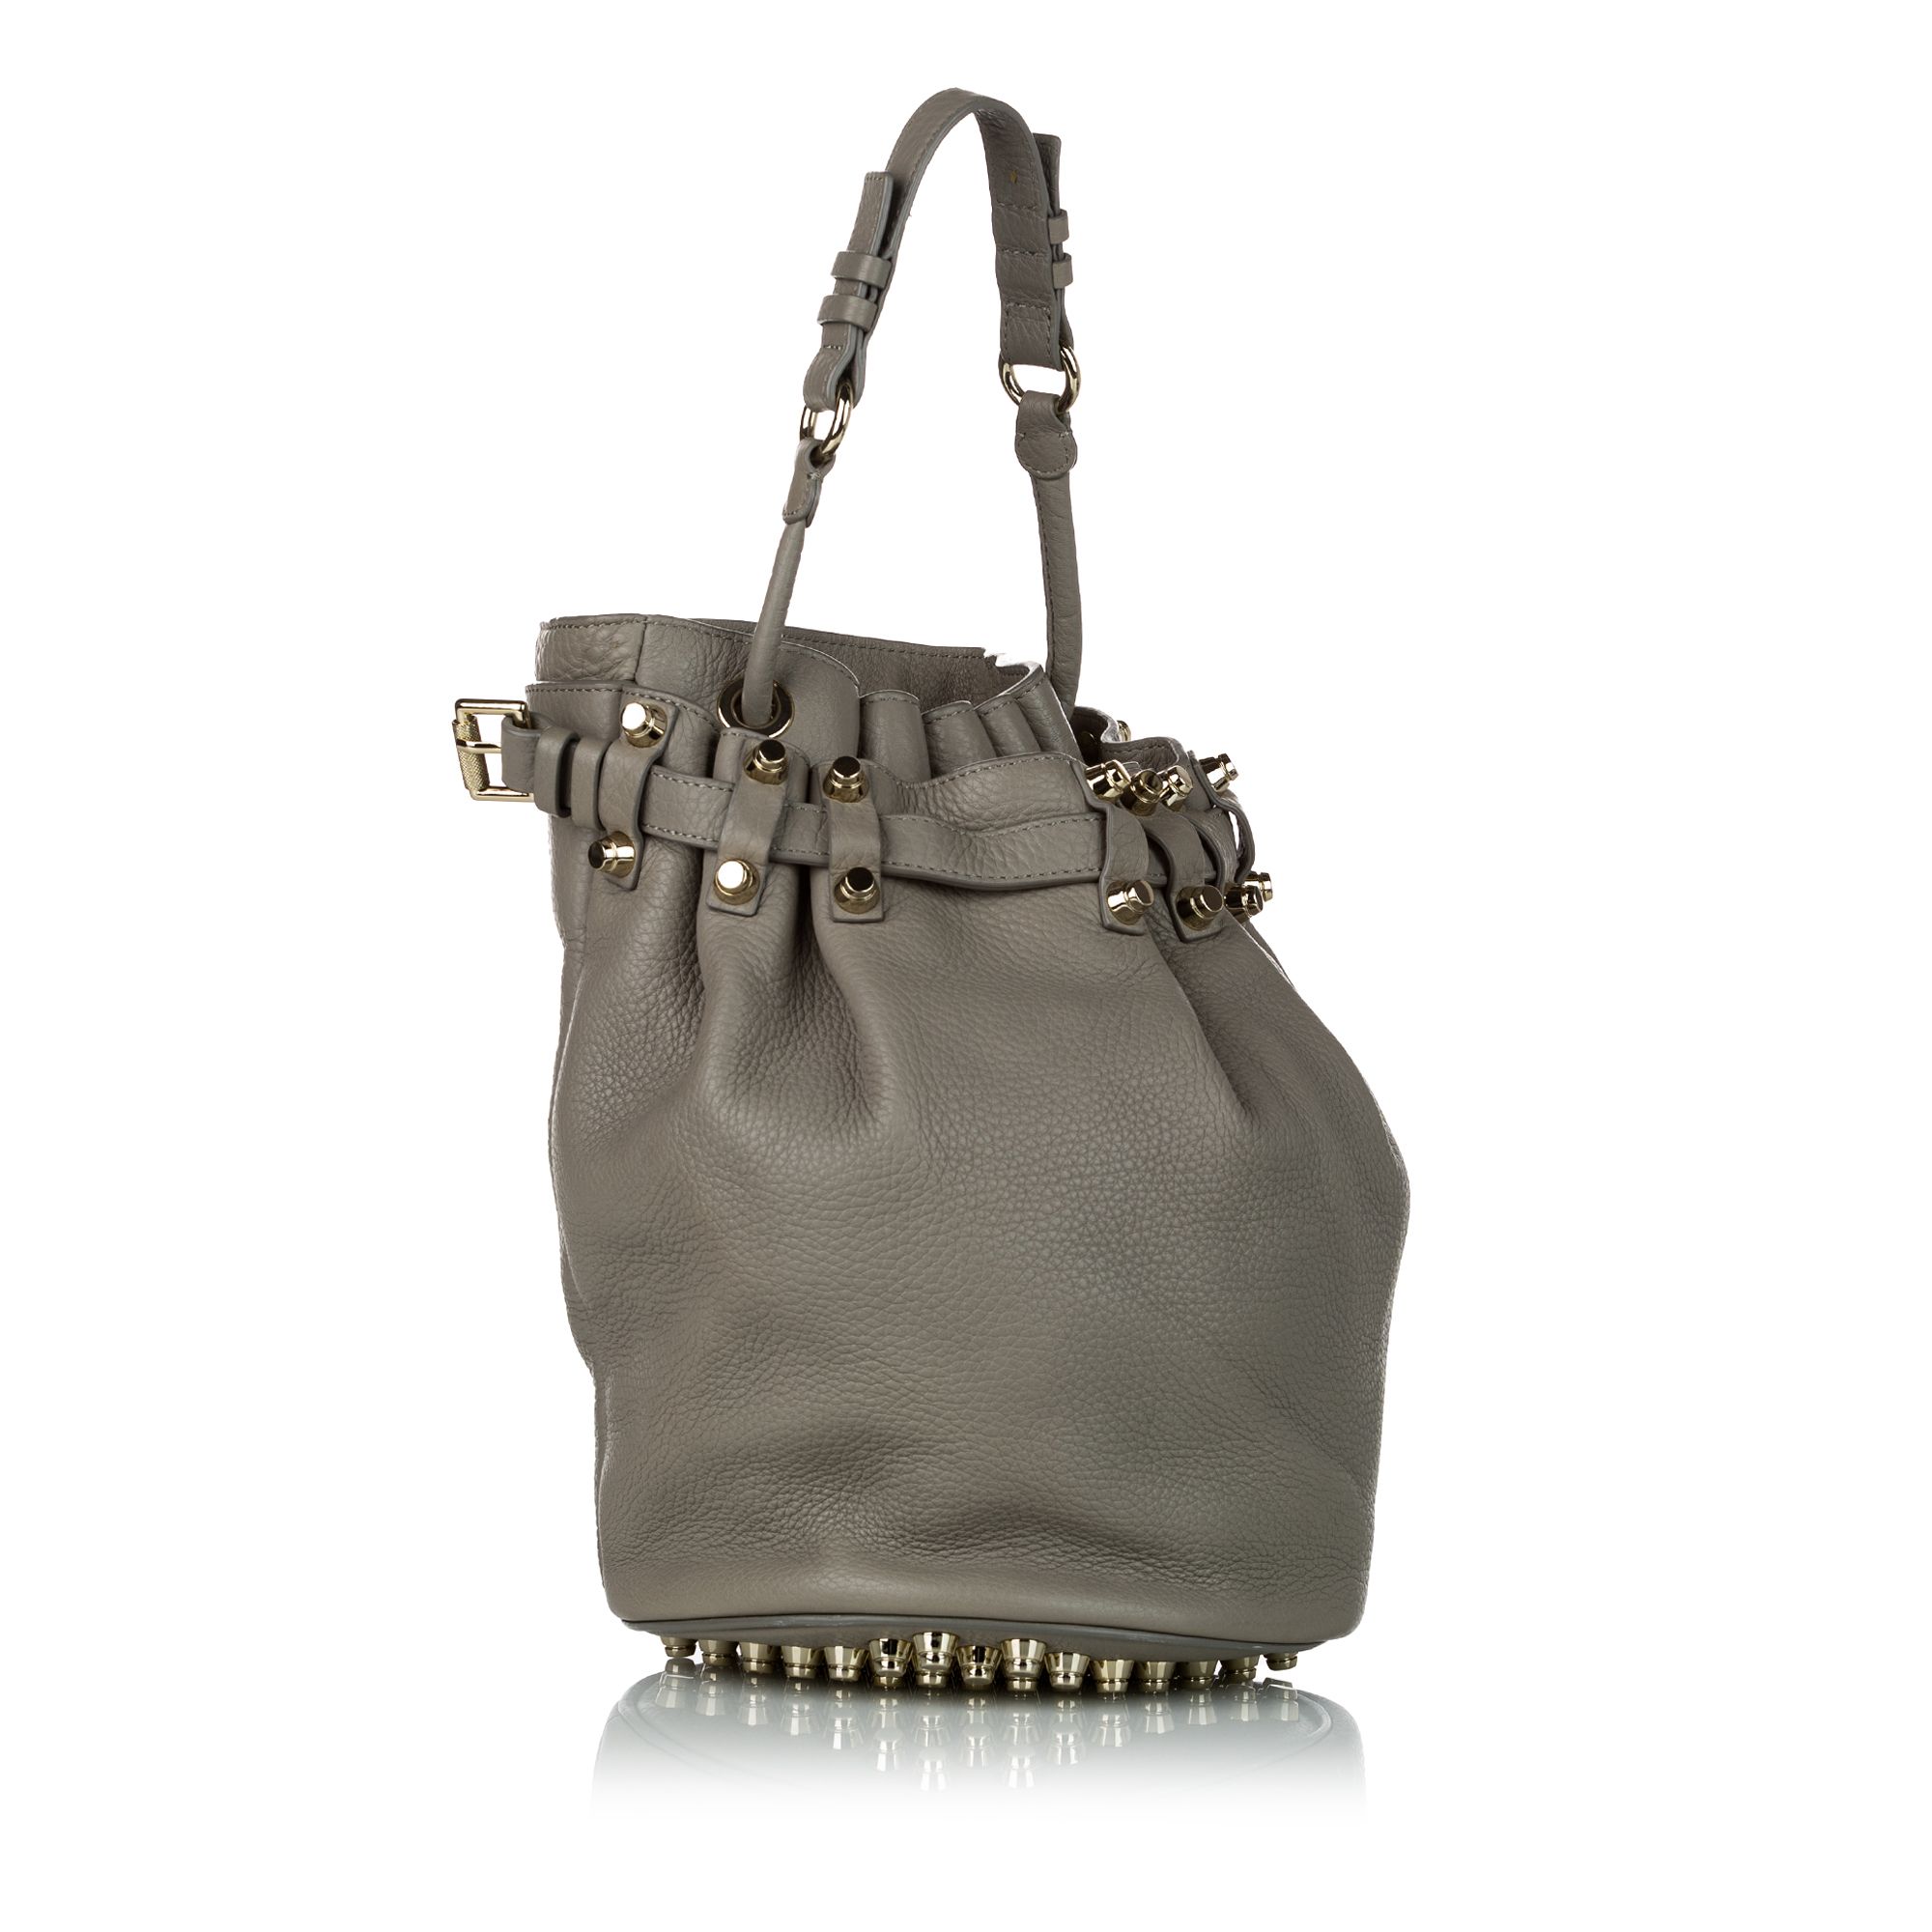 VINTAGE. RRP AS NEW. The Diego bucket bag features a textured leather body with aged brass tone hardware, exterior slip pockets, a top handle, an adjustable and detachable shoulder strap, an open top with a drawstring closure, and an interior zip pocket.Studs Scratched. Studs Scratched. 

Dimensions:
Length 32cm
Width 21cm
Depth 21cm
Hand Drop 16cm
Shoulder Drop 50cm

Original Accessories: Shoulder Strap, Dust Bag

Color: Gray
Material: Leather x Calf
Country of Origin: United States of America
Boutique Reference: SSU155839K1342


Product Rating: GoodCondition

Certificate of Authenticity is available upon request with no extra fee required. Please contact our customer service team.